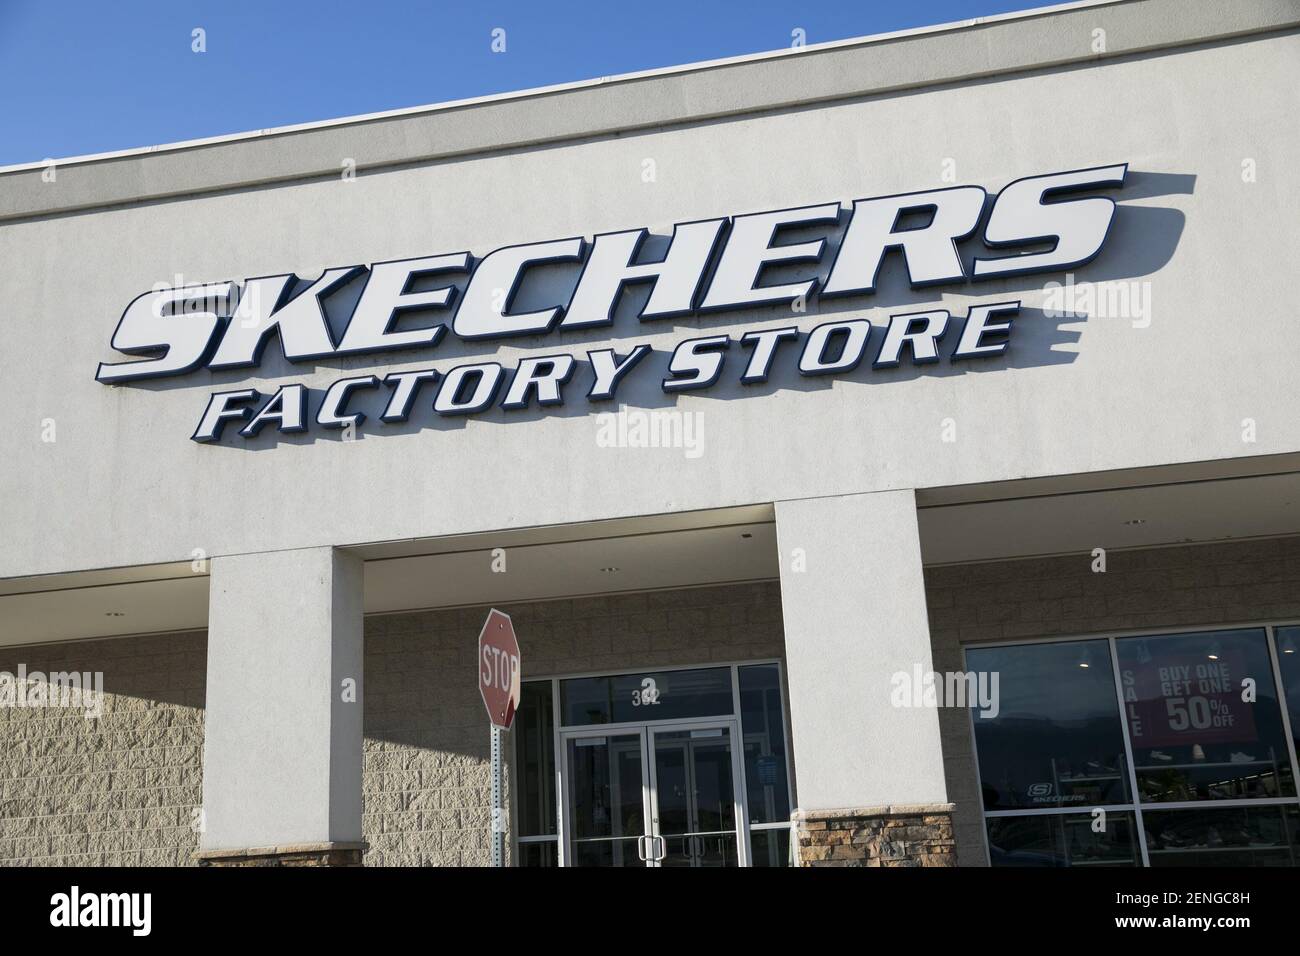 A logo sign outside of a Skechers Factory Store retail store location in Orem, Utah July 29, 2019 Stock Photo - Alamy